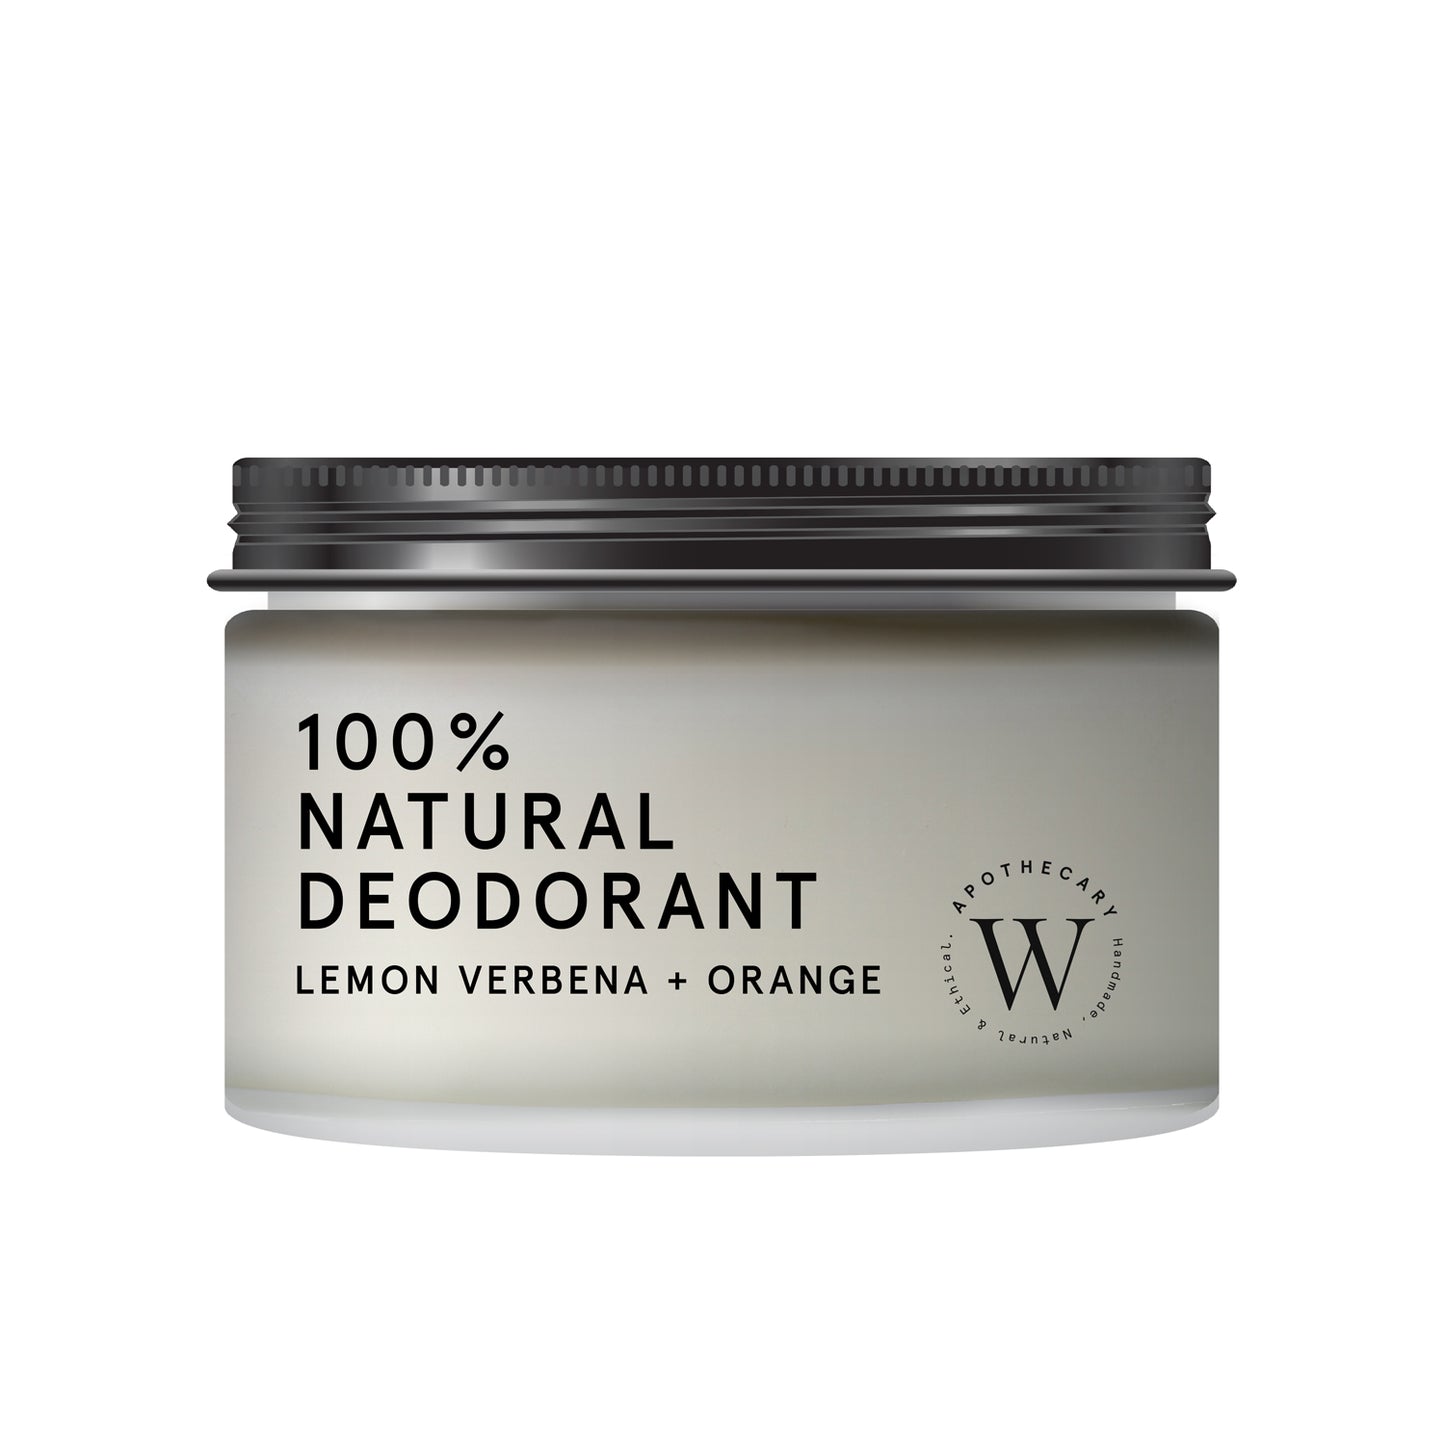 This all-natural unisex deodorant will keep you smelling fresh all day long. You will feel comfortable that you are not putting any harsh chemicals under a very vulnerable part of your body. Wonderveld Apothecary is a handmade, sustainable, ethical skincare line made with organic ingredients. Available at Wonderveld Apothecary Windhoek, Namibia. Ships Worldwide. Contact us at wonderveld@icloud.com to order yours today. www.wonderveld.store